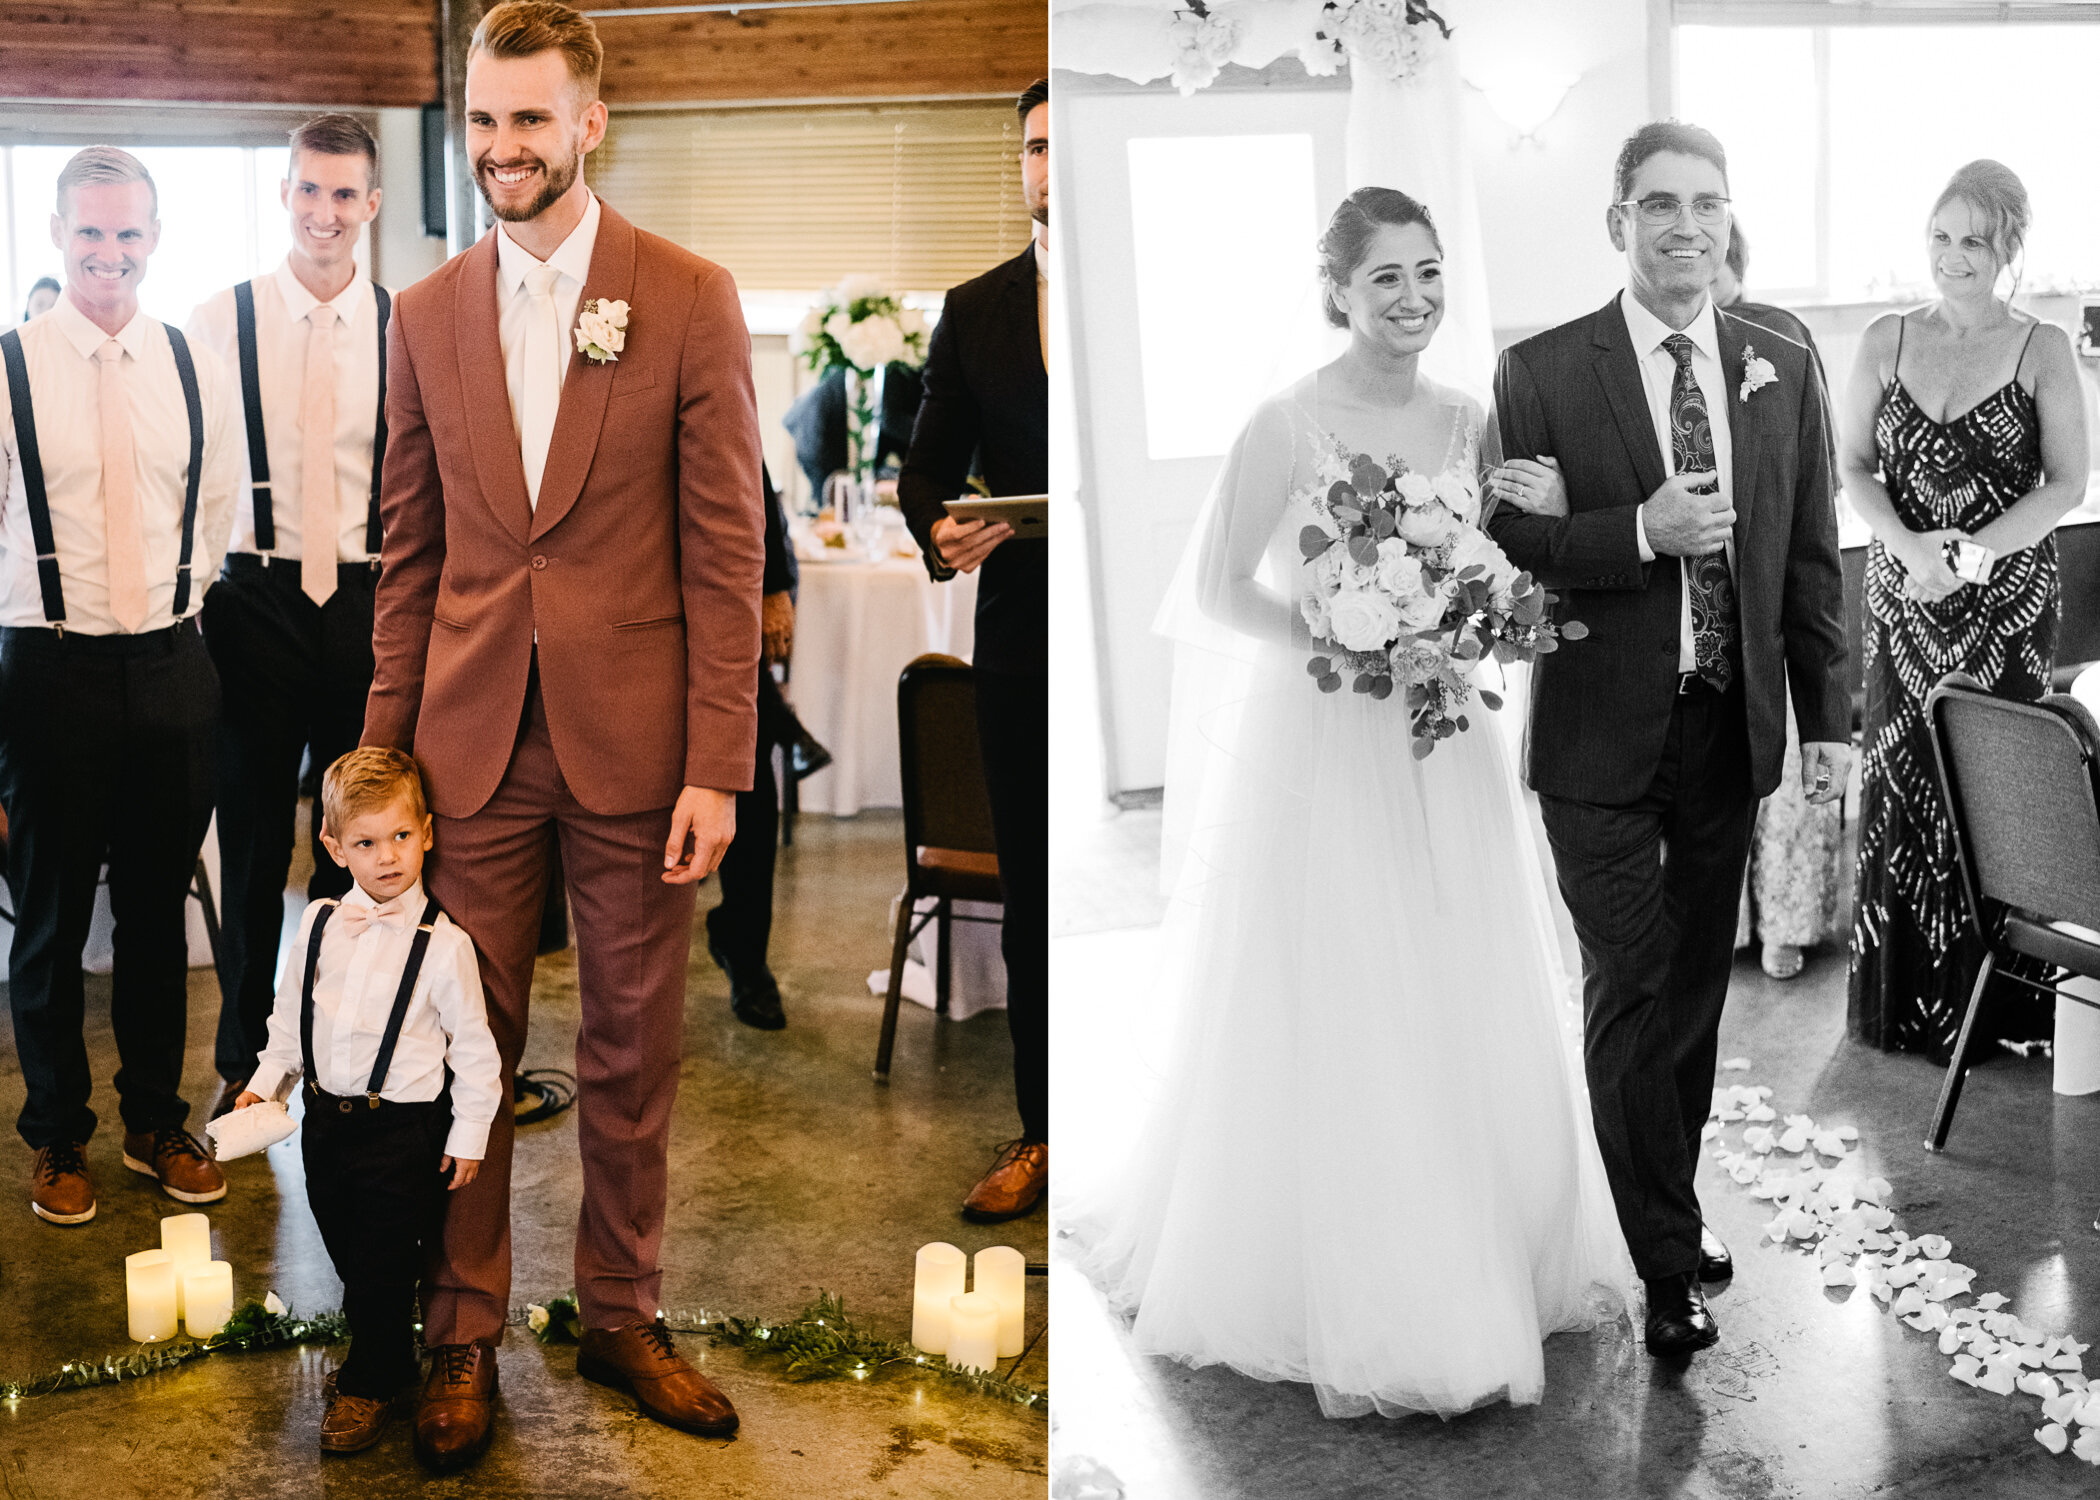  Groom in maroon suit stands with ring bearer as he sees bride approach aisle 